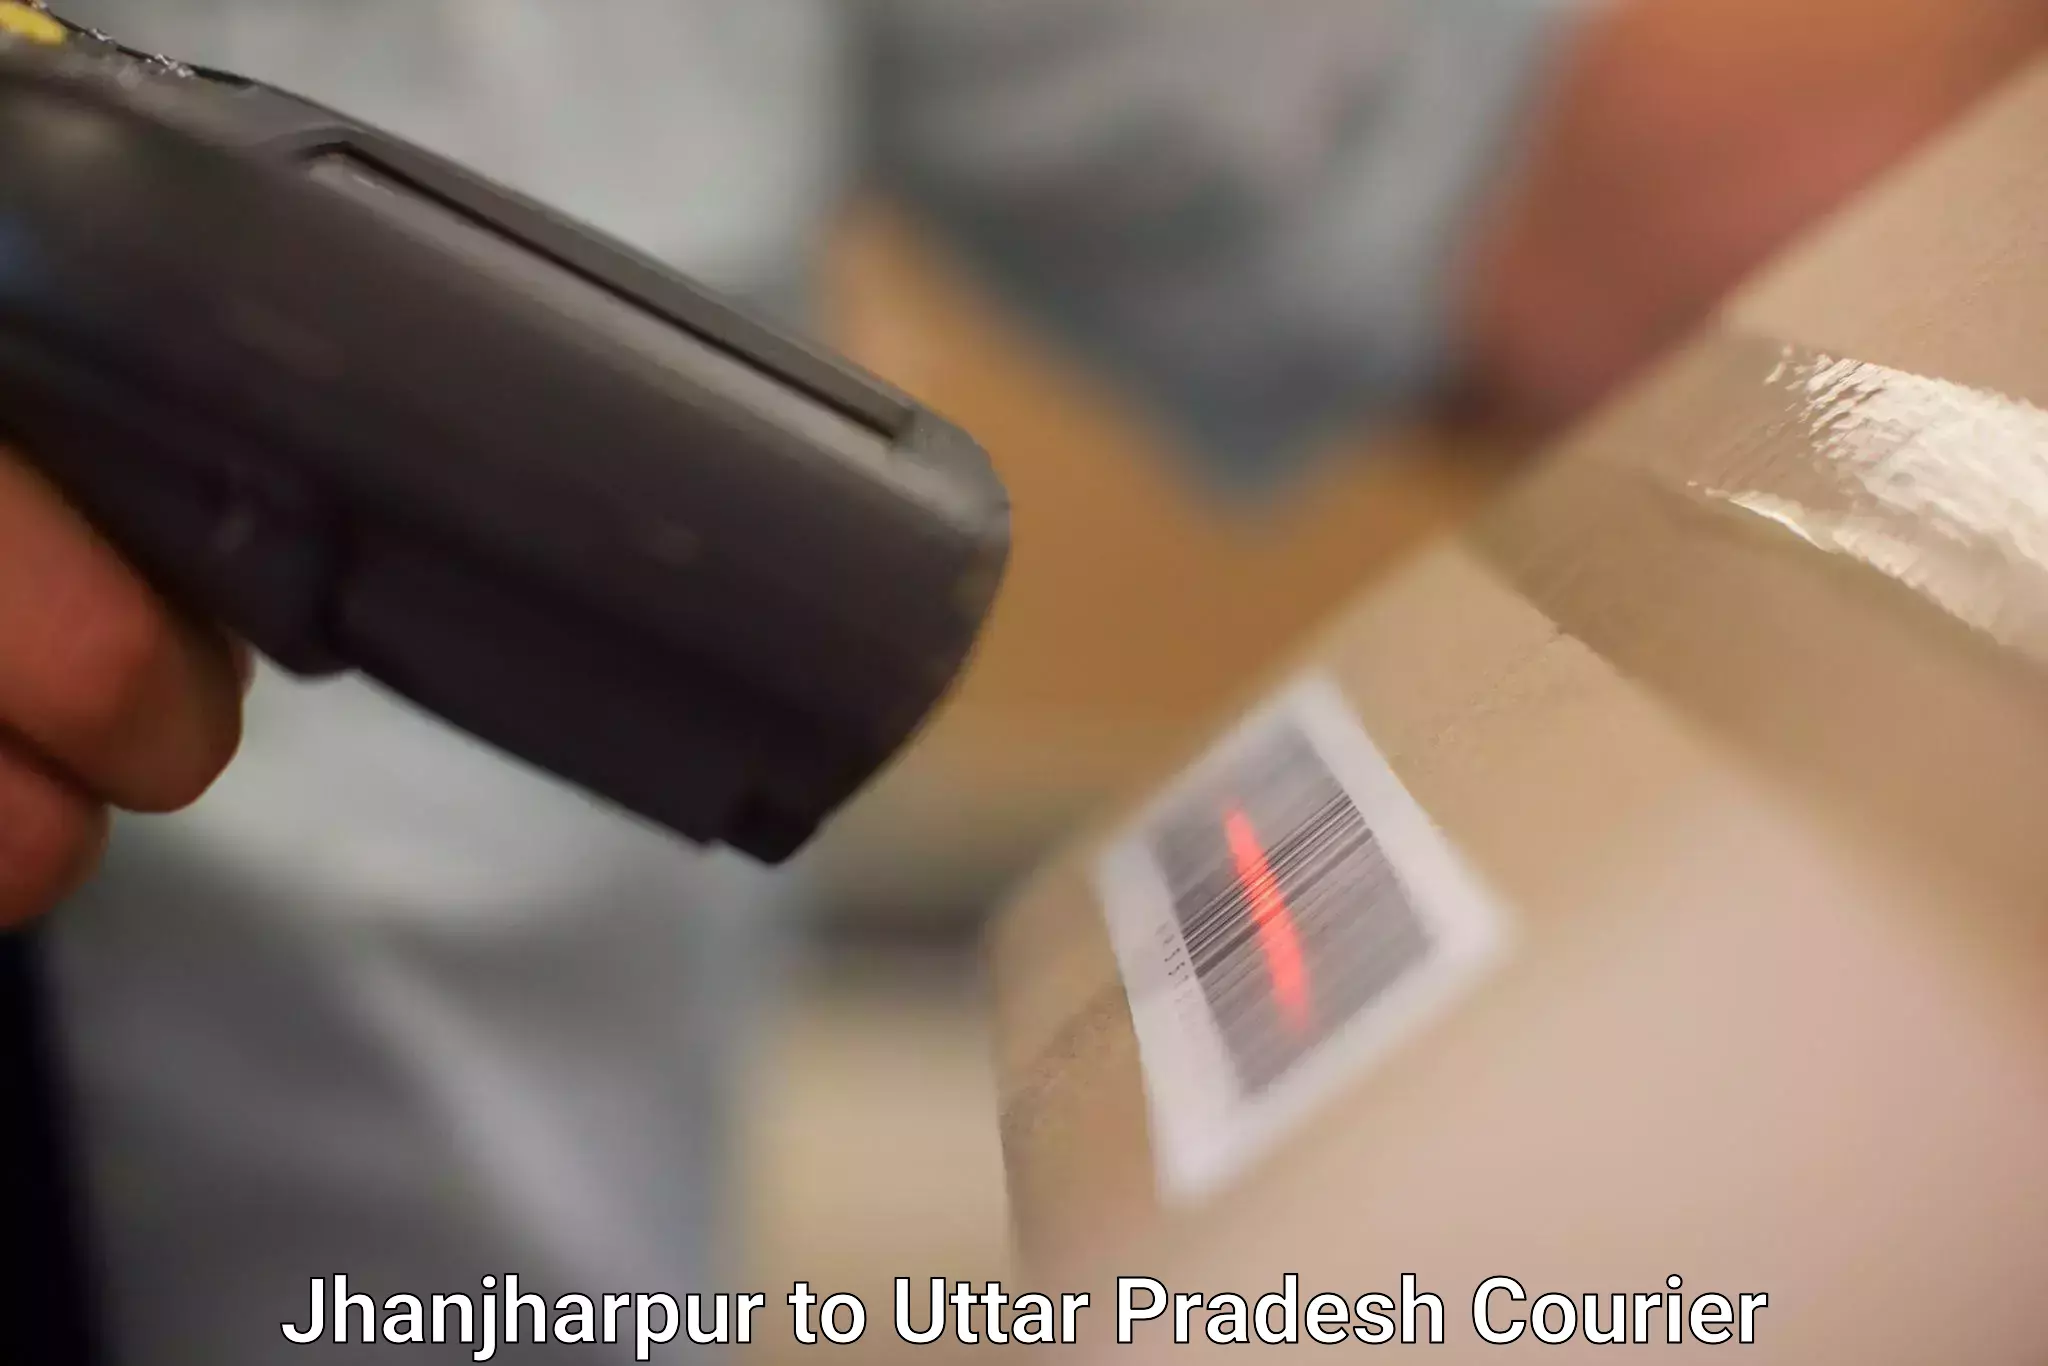 Efficient parcel tracking in Jhanjharpur to Utraula